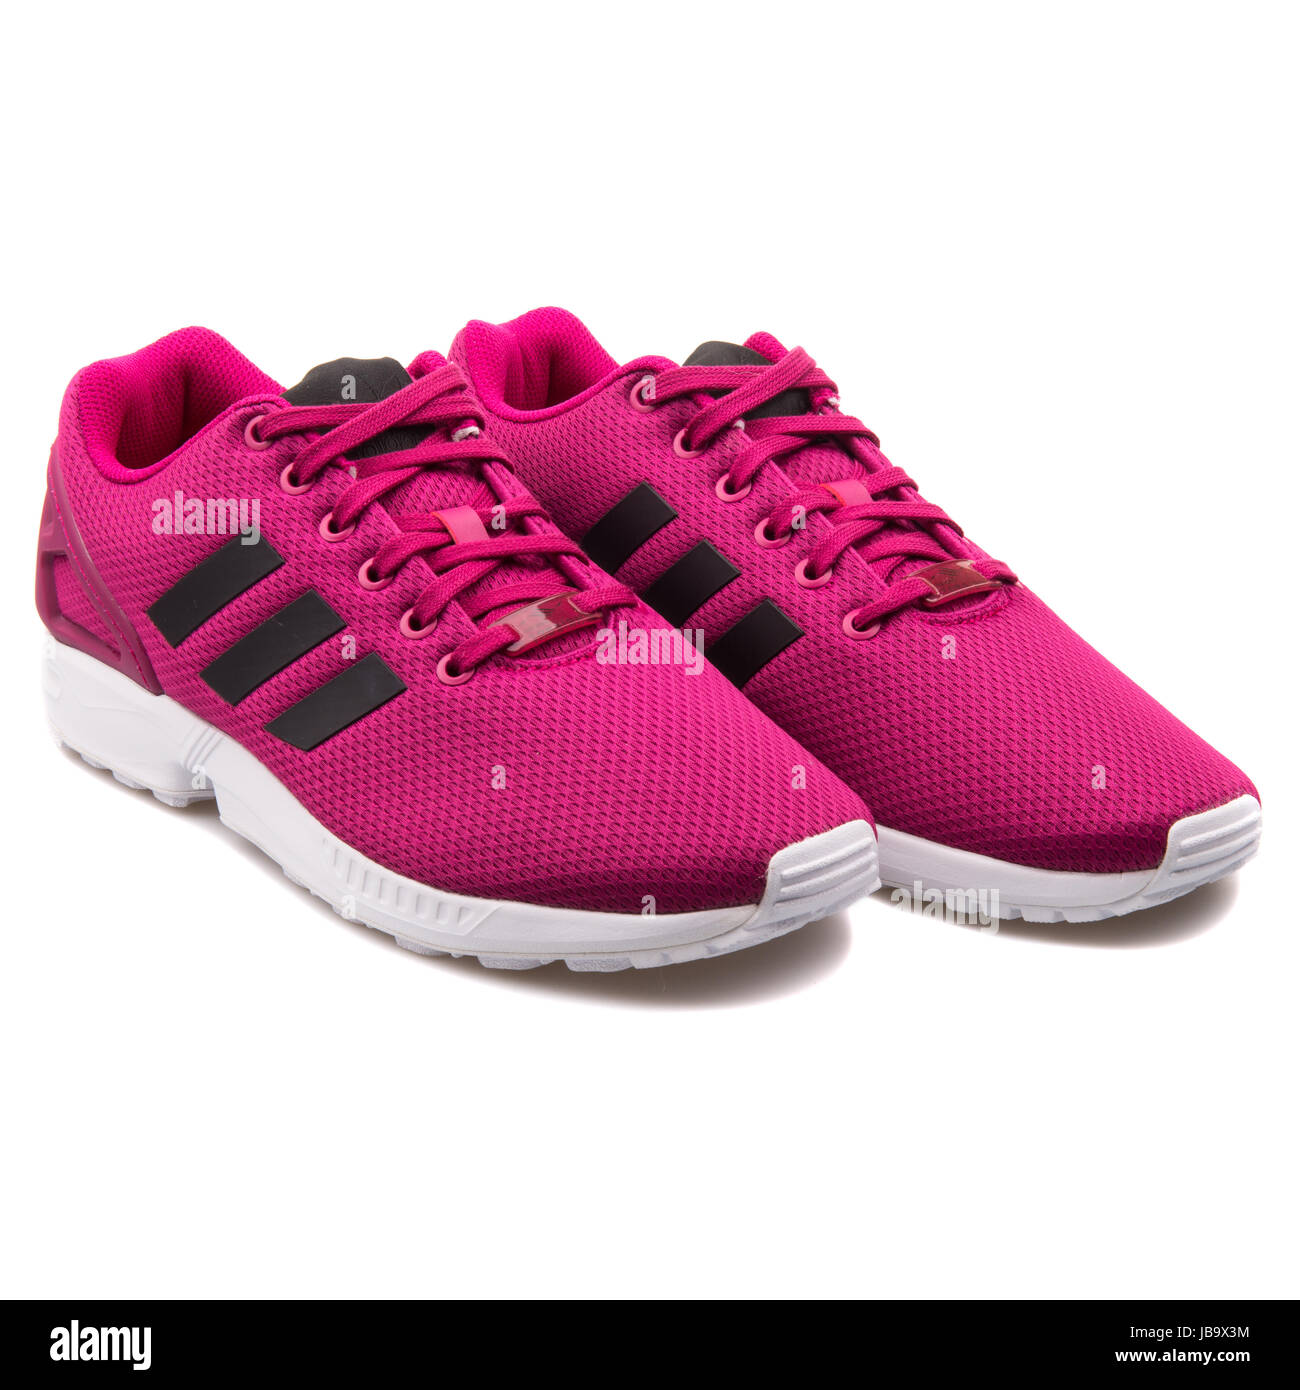 Adidas ZX Flux Pink Men's Running Shoes - AF6343 Stock Photo - Alamy